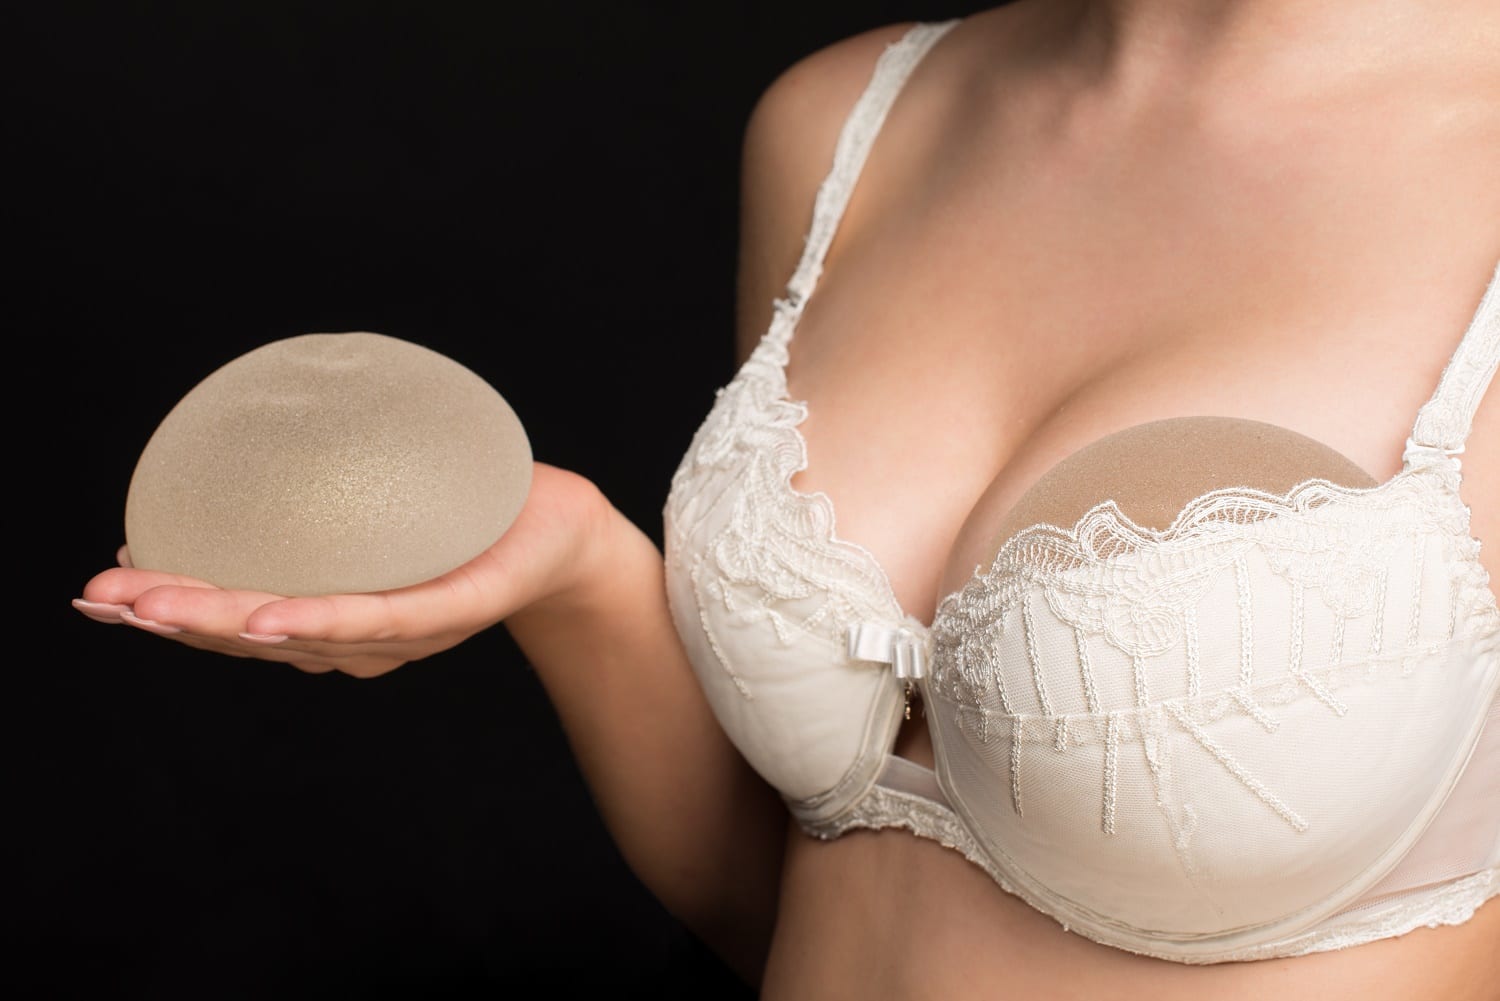 What’s the Deal with Cup Size & CCs for Breast Implants?